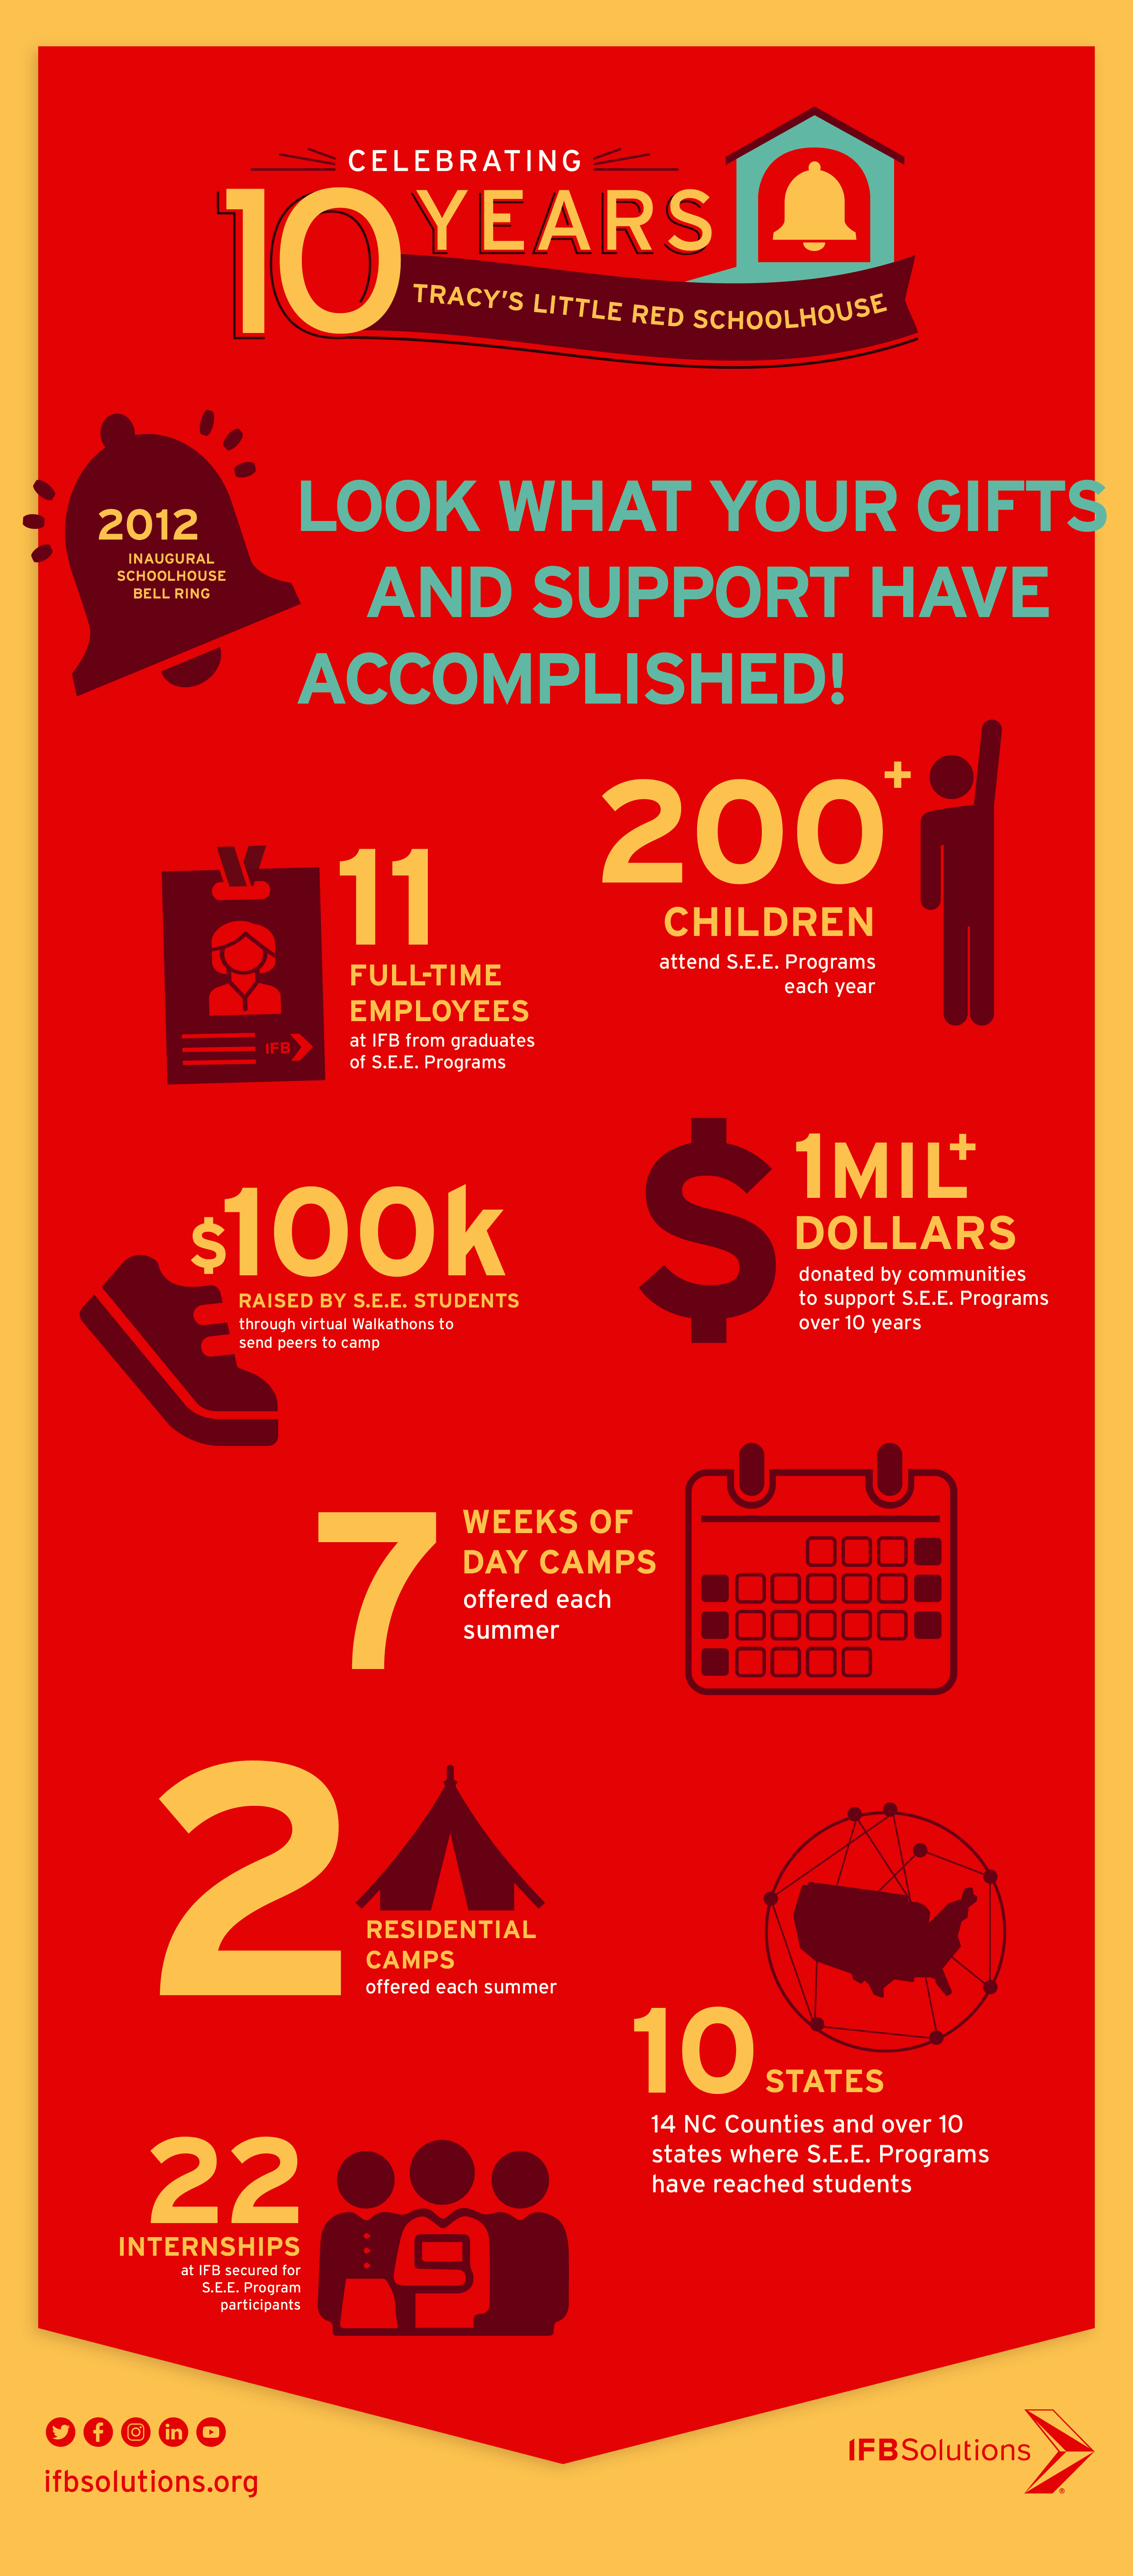 Celebrating 10 Years Tracy’s Little Red Schoolhouse. Look what your gifts and support have accomplished! 2012 – inaugural schoolhouse bell ring. 11 full-time employees at IFB from graduates of S.E.E. Programs. 200+ children attend S.E.E. Programs each year. $100k raised by S.E.E. students through virtual Walkathons to send peers to camp. $1 million dollars plus donated by communities to support S.E.E. Programs over 10 years. 7 weeks of day camps offered each summer. 2 residential camps offered each summer. 10 states and 14 NC counties where S.E.E. programs have reached students. 22 internships at IFB secured for S.E.E. Program Participants. IFB Solutions Logo, ifbsolutions.org, icons for Twitter, Facebook, Instagram, Linkedin and Youtube. 